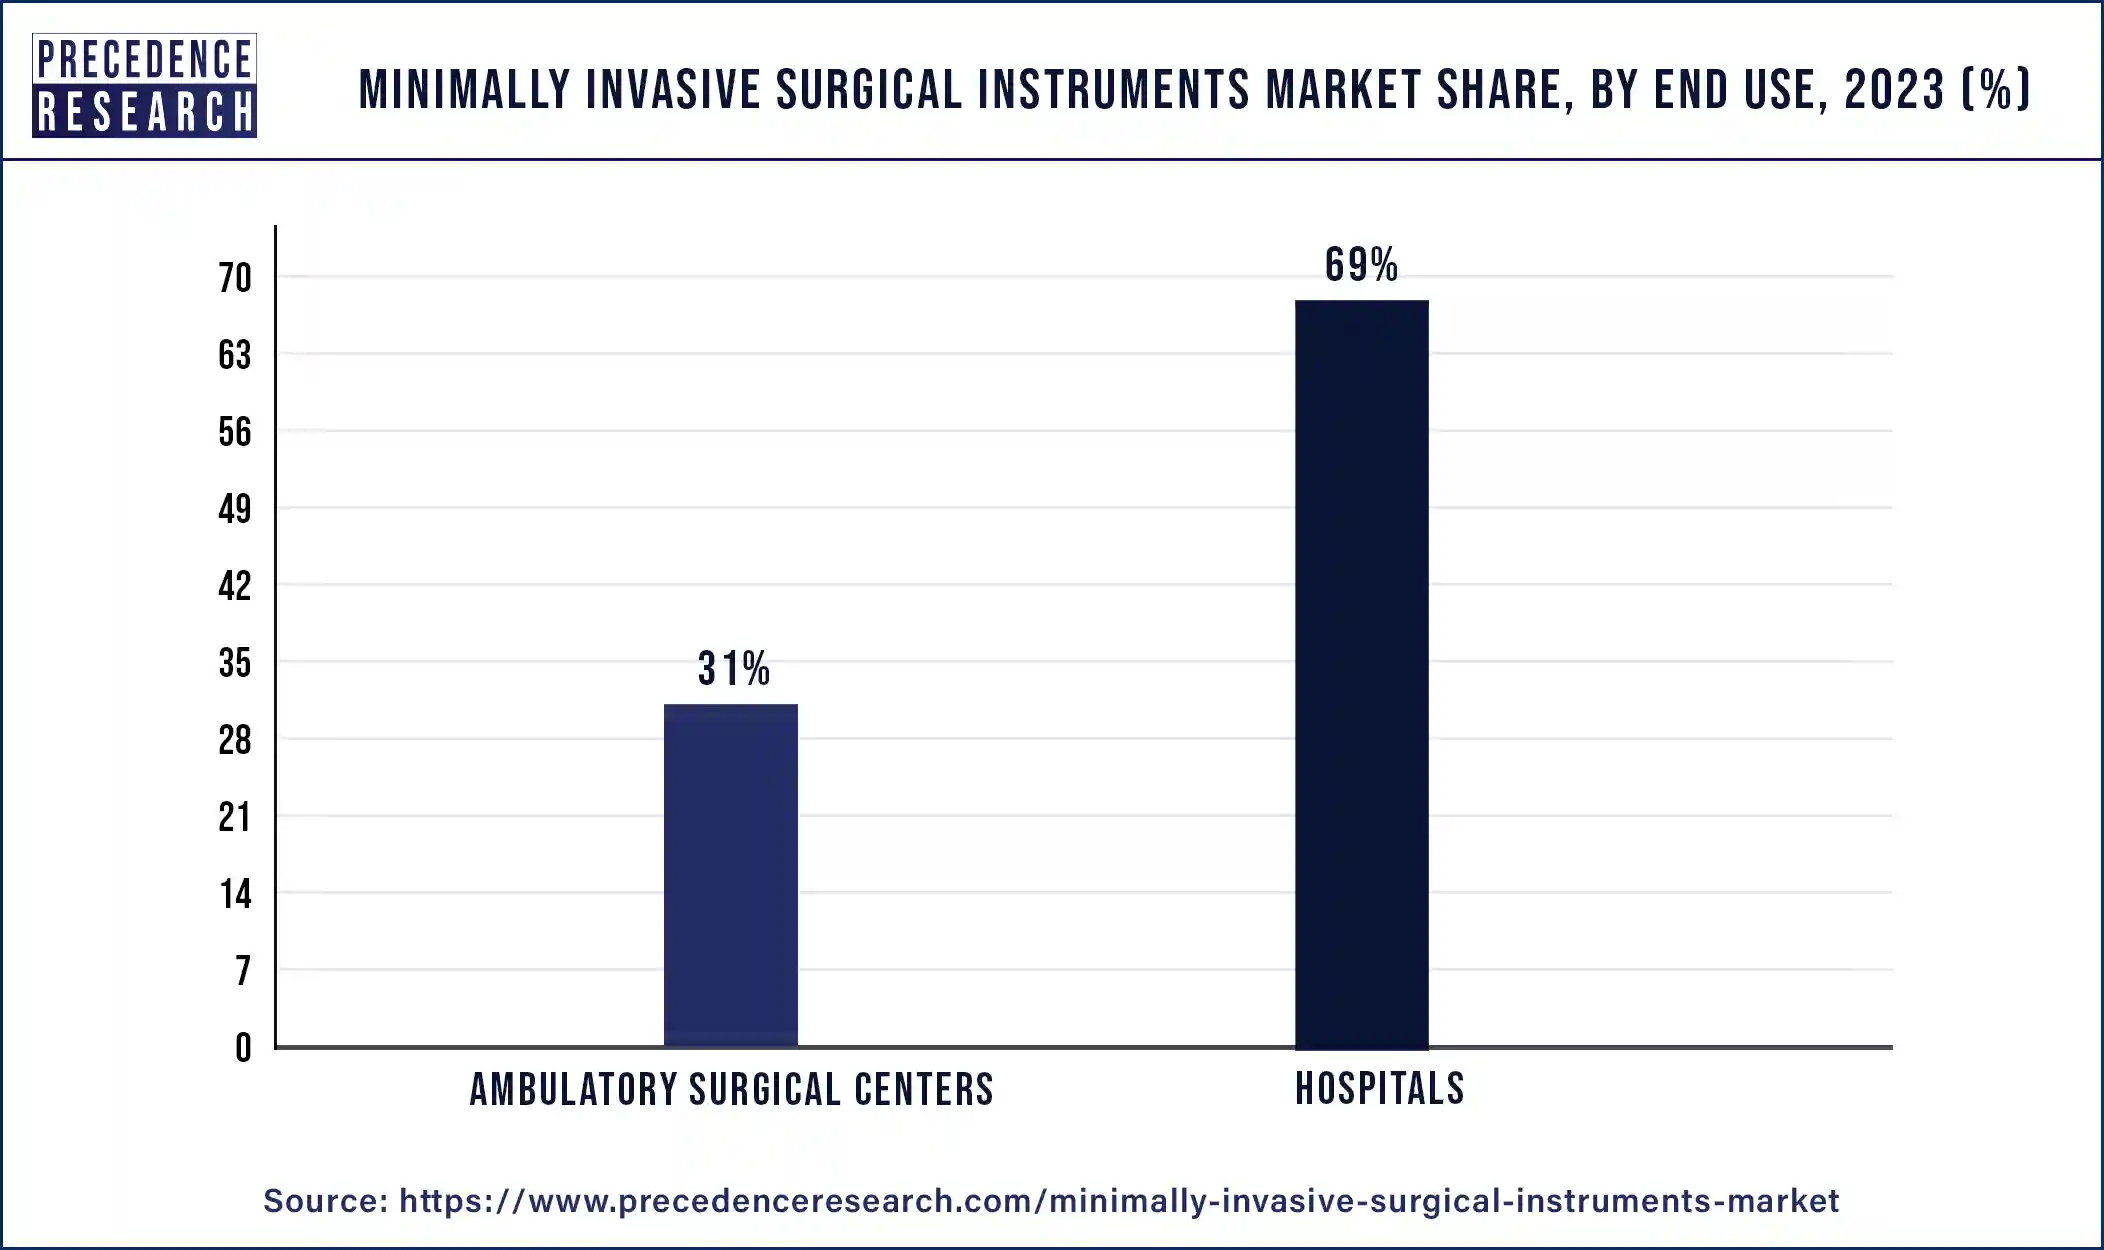 Minimally Invasive Surgical Instruments Market Share, By End Use, 2023 (%)